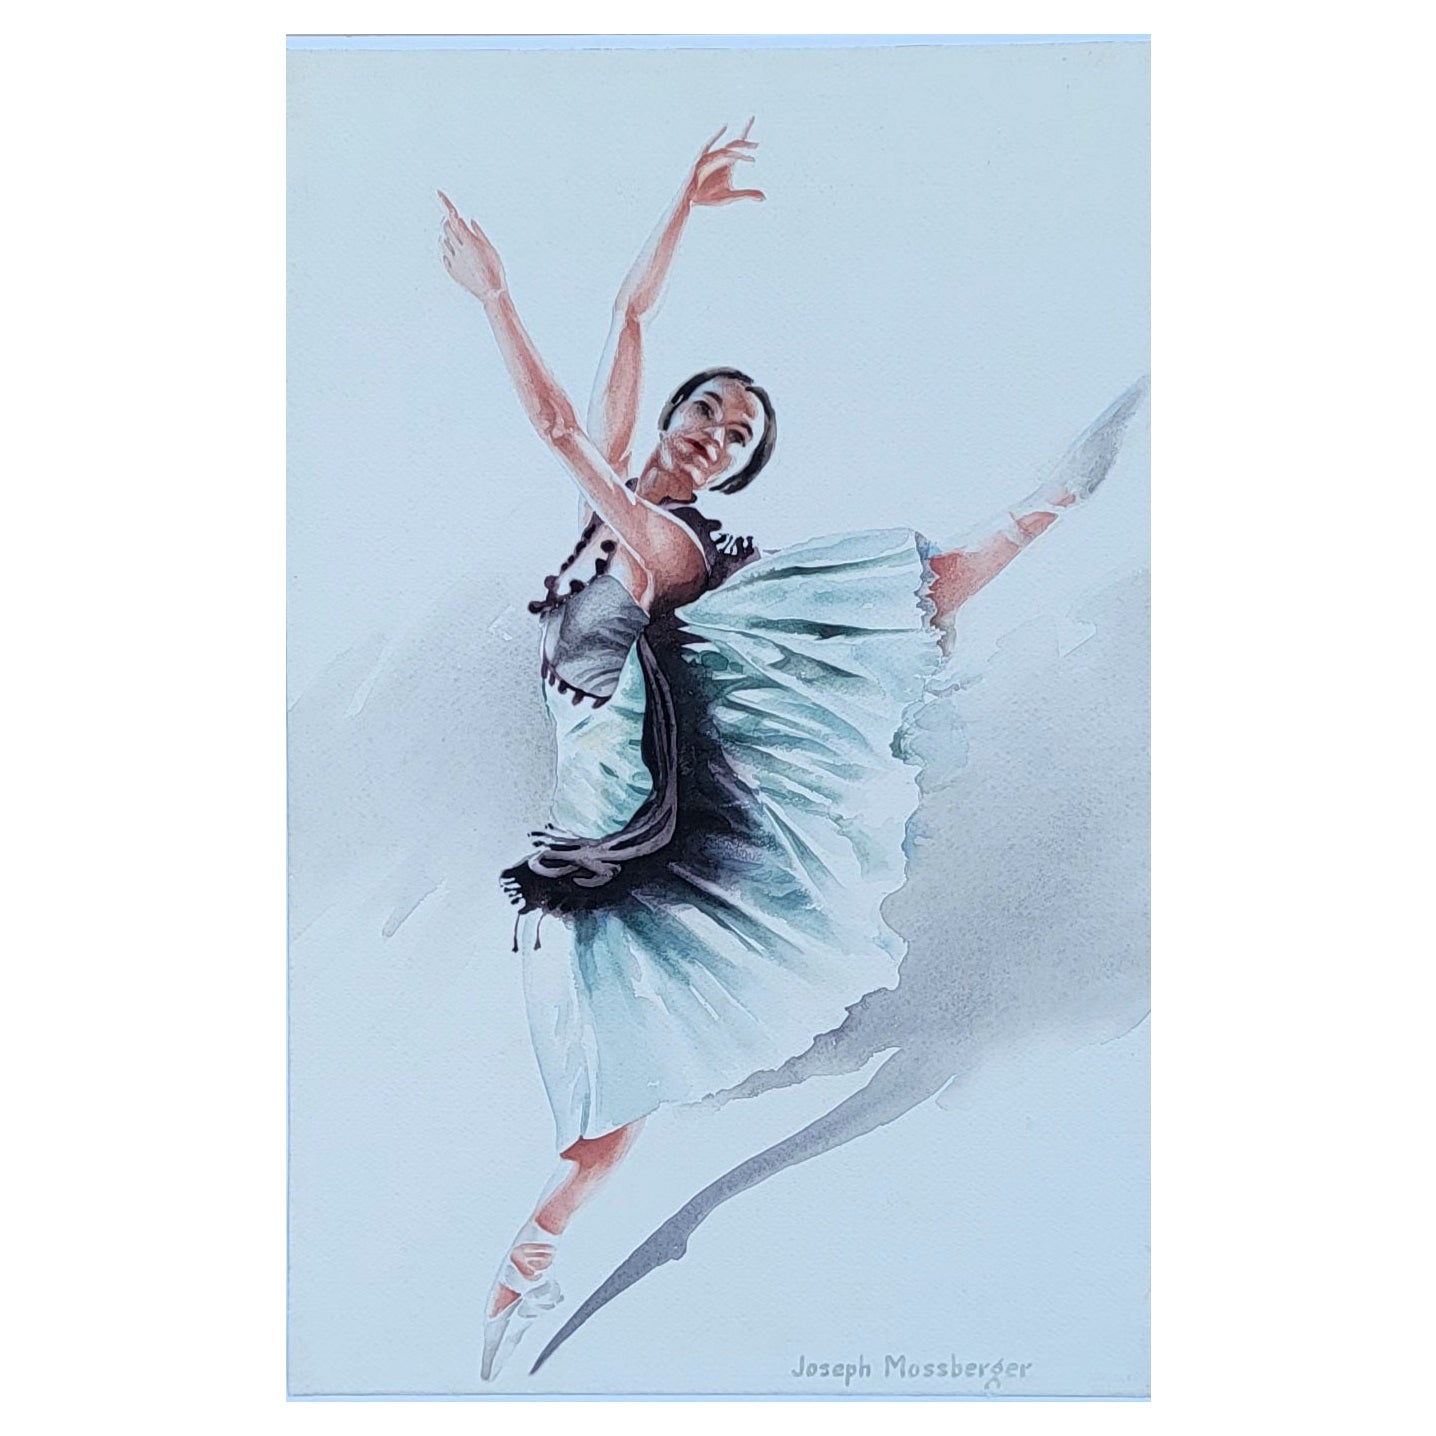 Ballerina Dancer Painting by Joseph Mossberger For Sale at 1stDibs